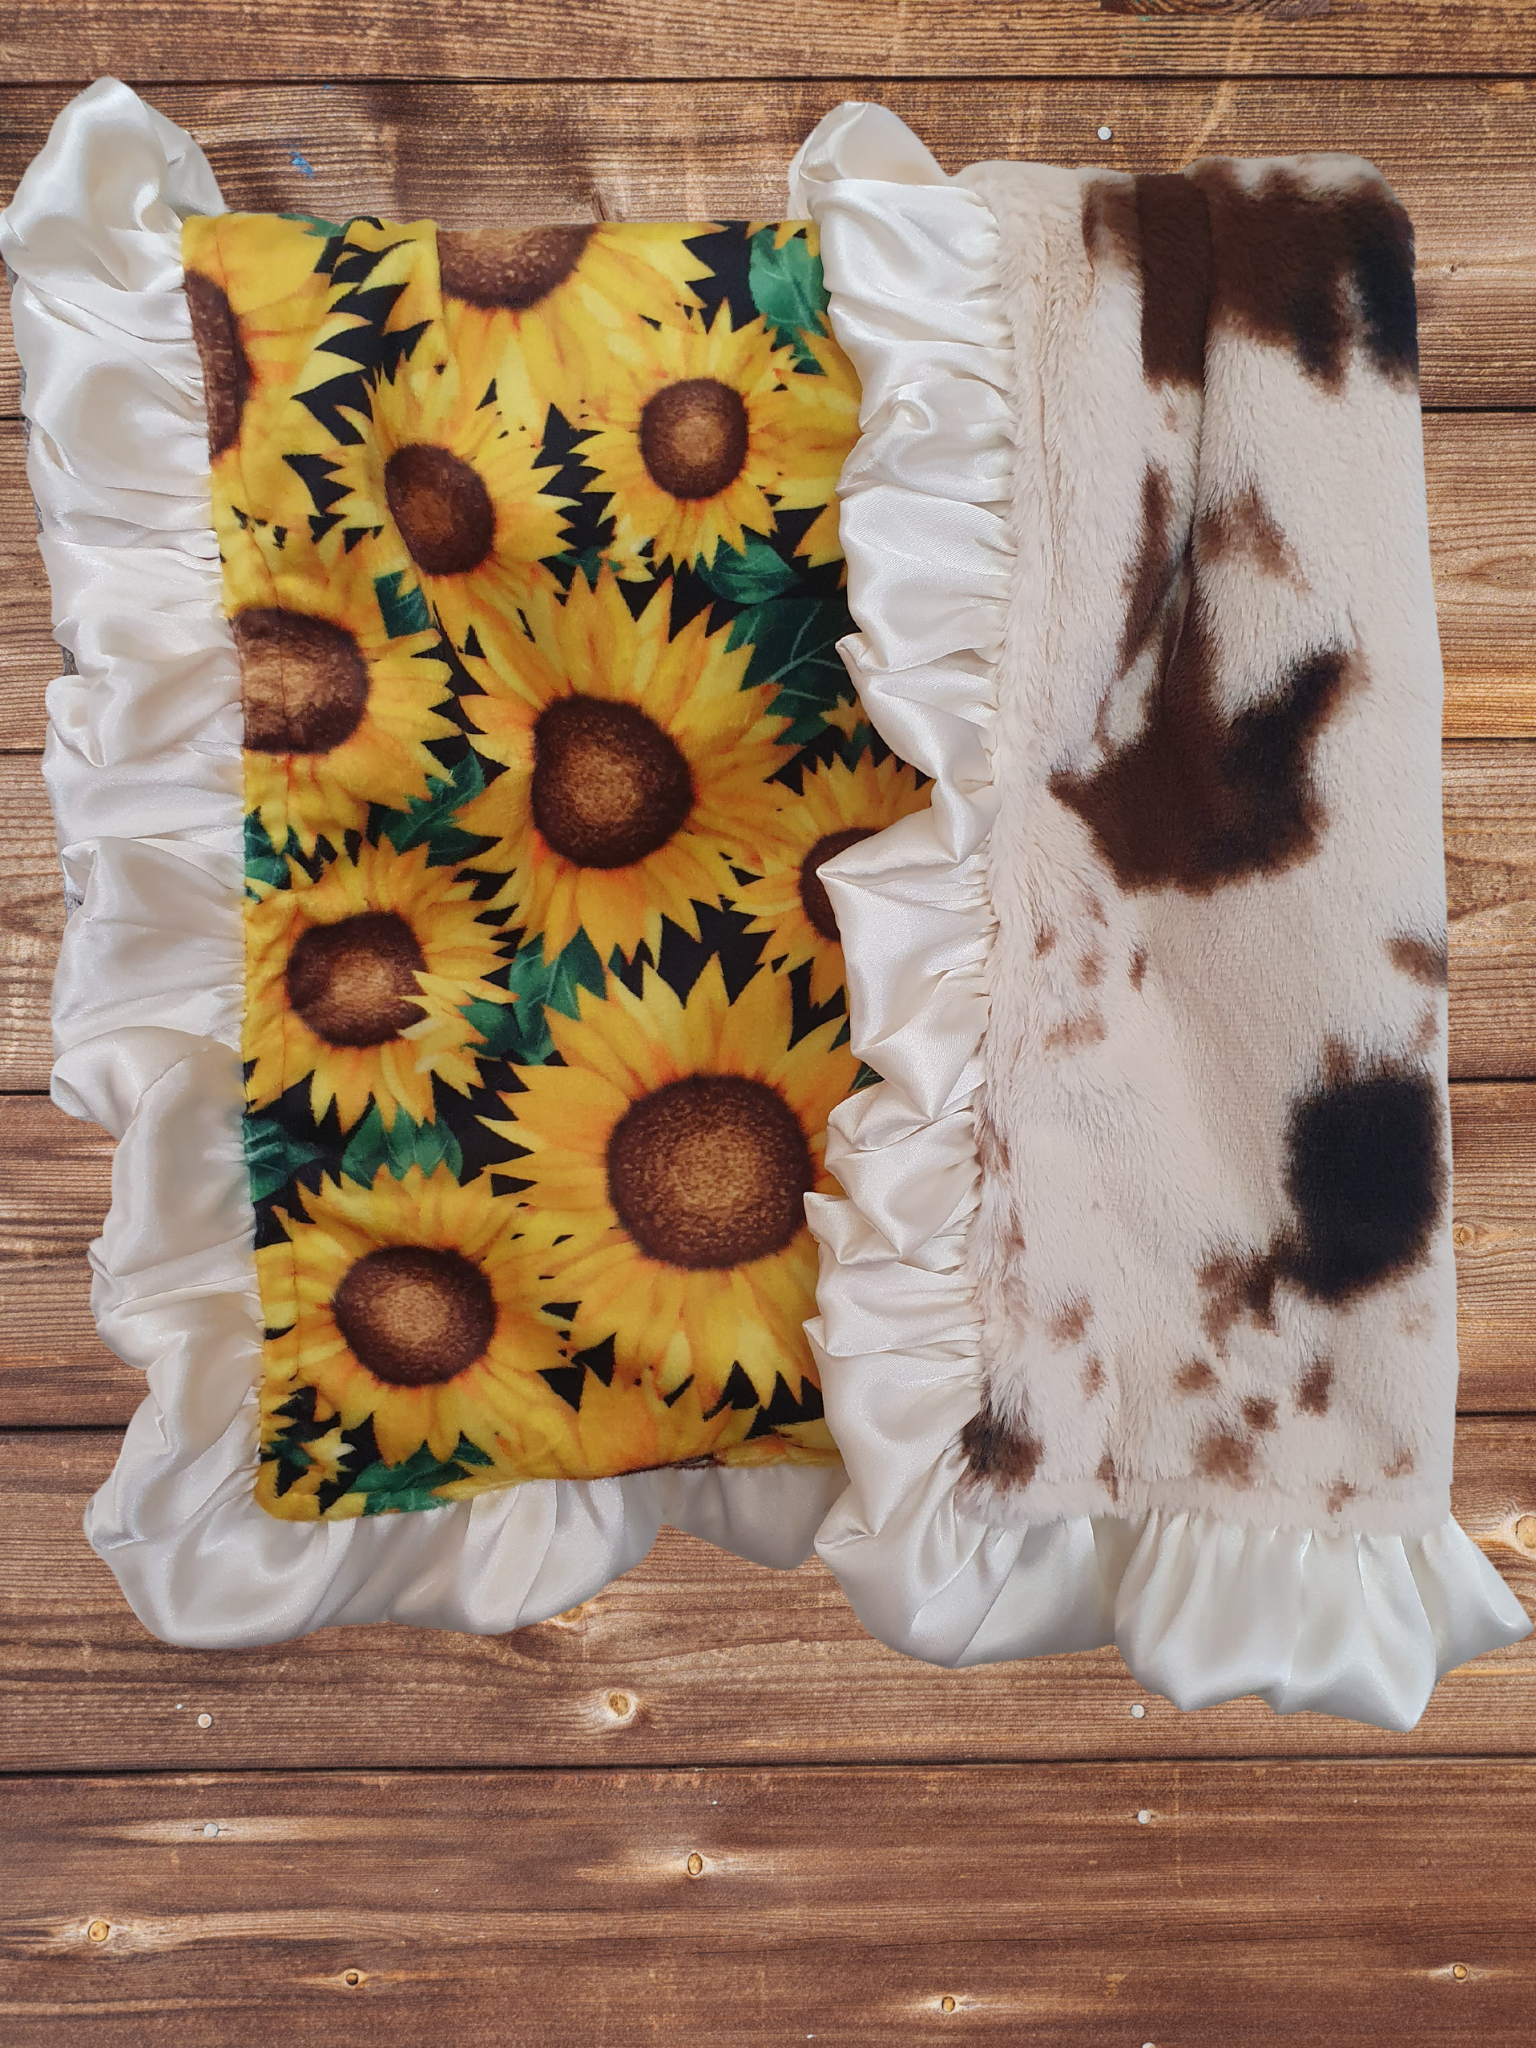 Ruffle Baby Lovey - Sunflower Minky and Cow Minky Lovey - DBC Baby Bedding Co 